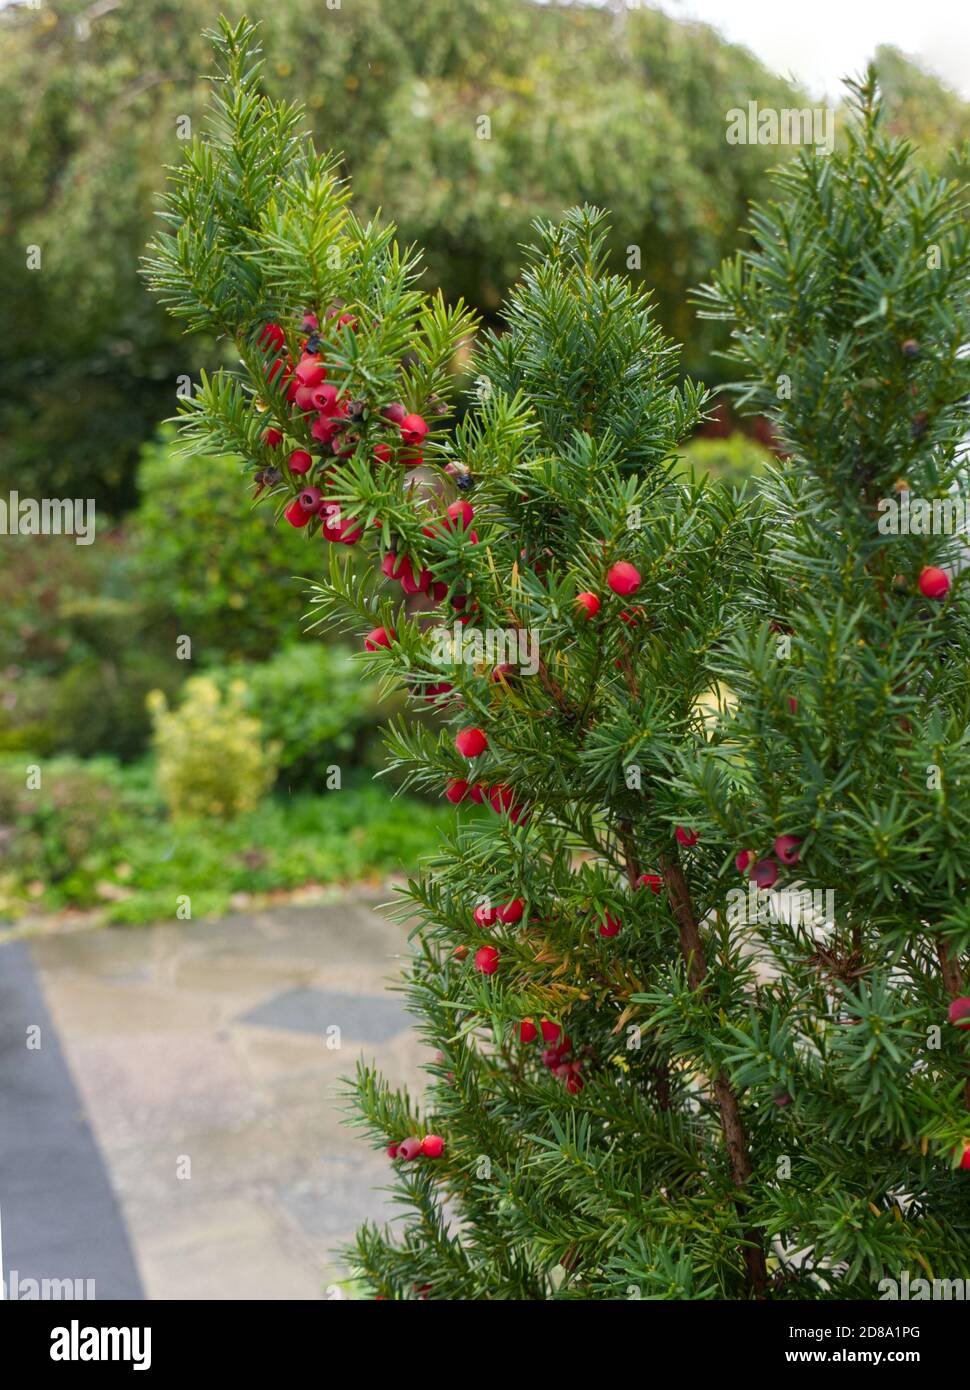 English Yew Tree, Taxus Baccata, Spiky leaves and red berries. Autumn English countryside walk in Woodlands, Parklands. Poisonous.  Yew tree. Stock Photo